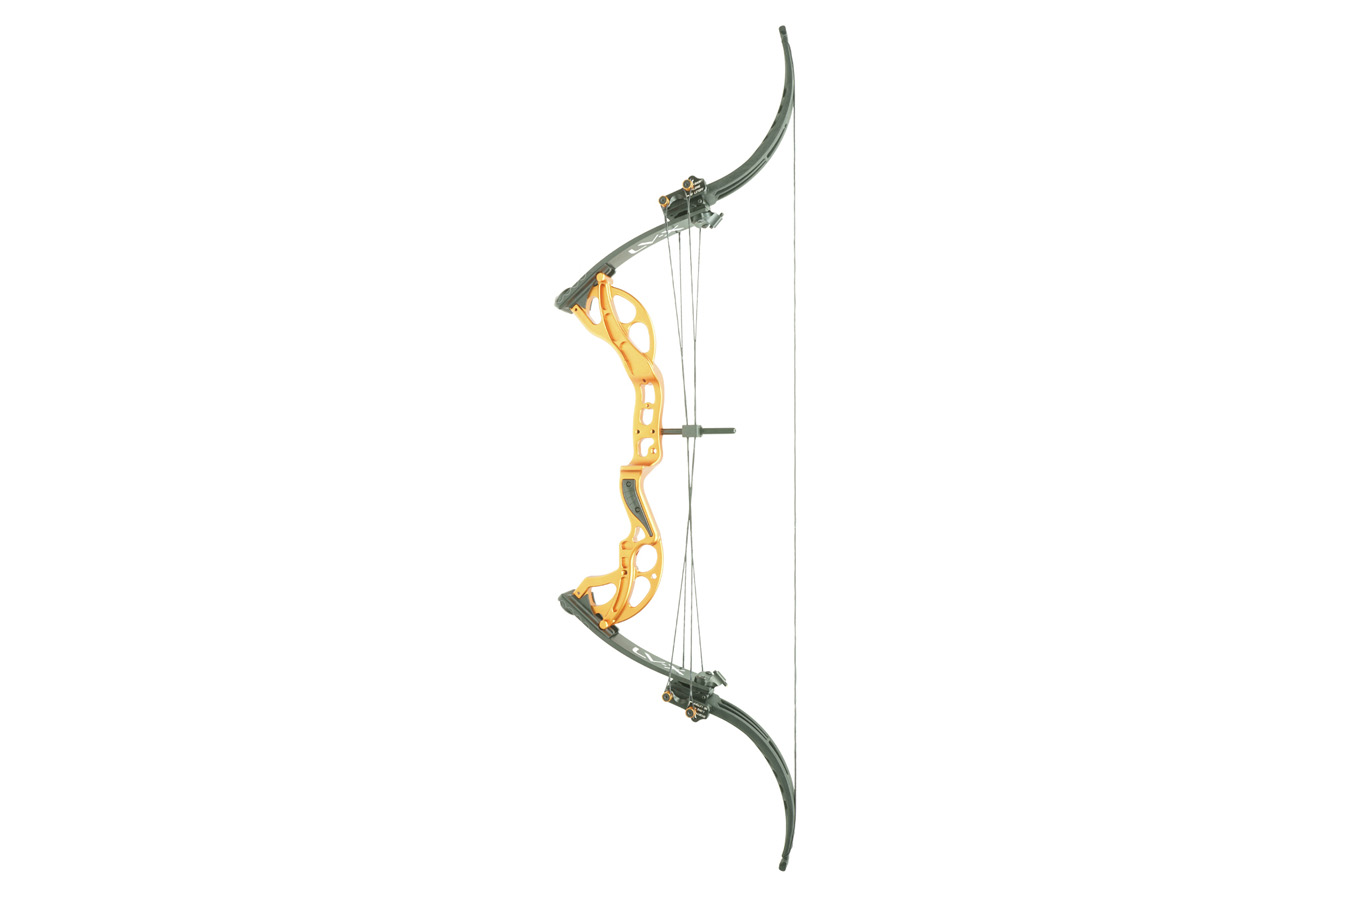 Muzzy LV-X Boefishing Orange Lever Bow for Sale, Online Archery Store